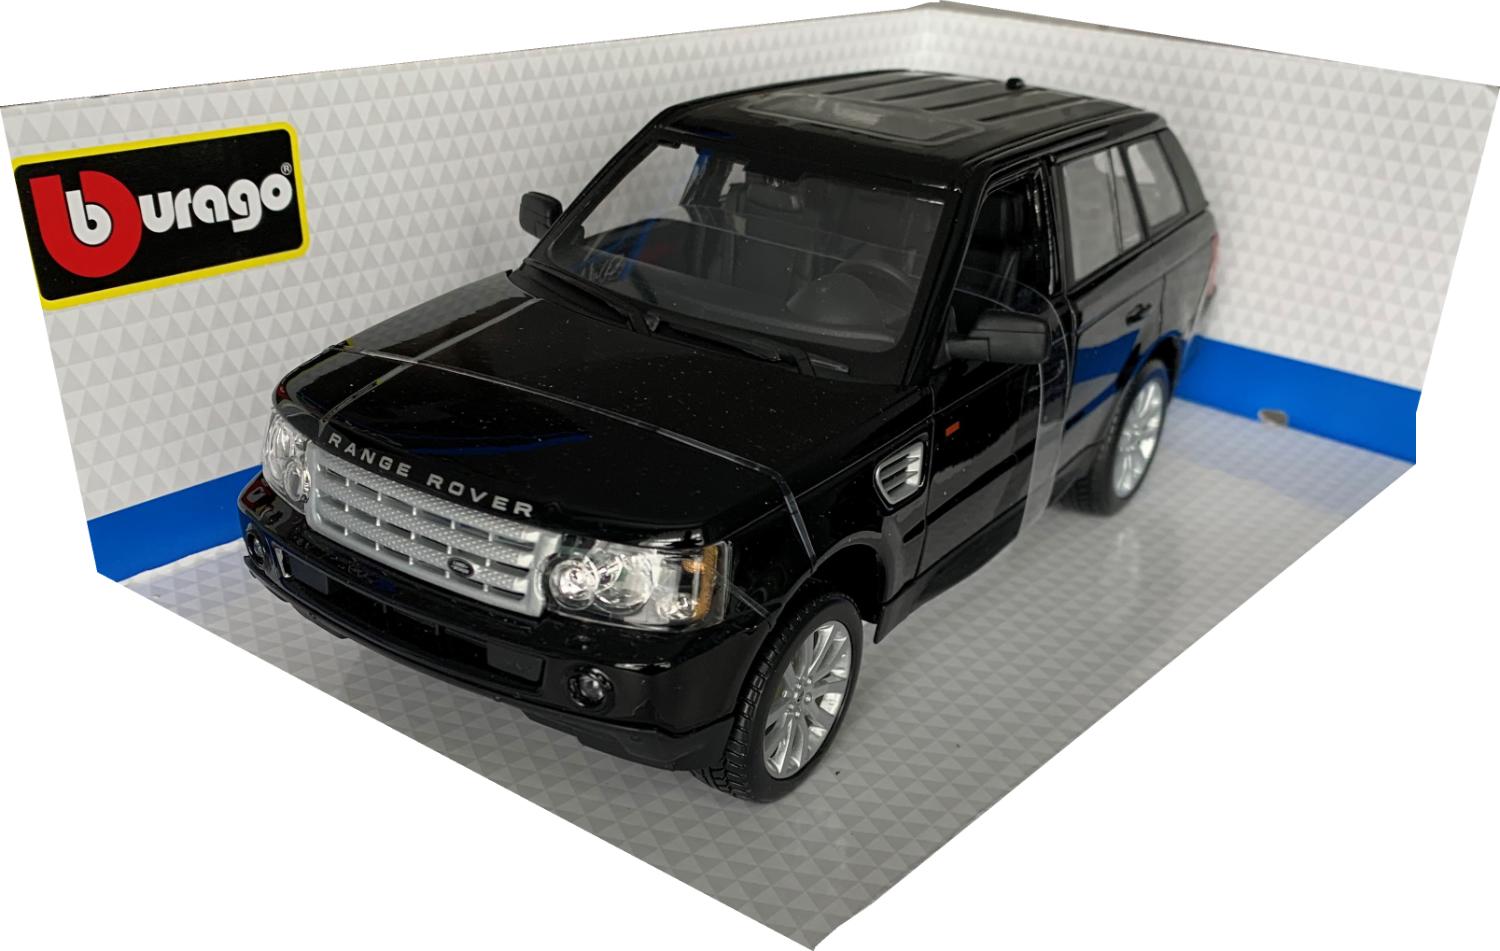 Diecast models of Range Rovers and Range Rover Sports in 1:18 scale